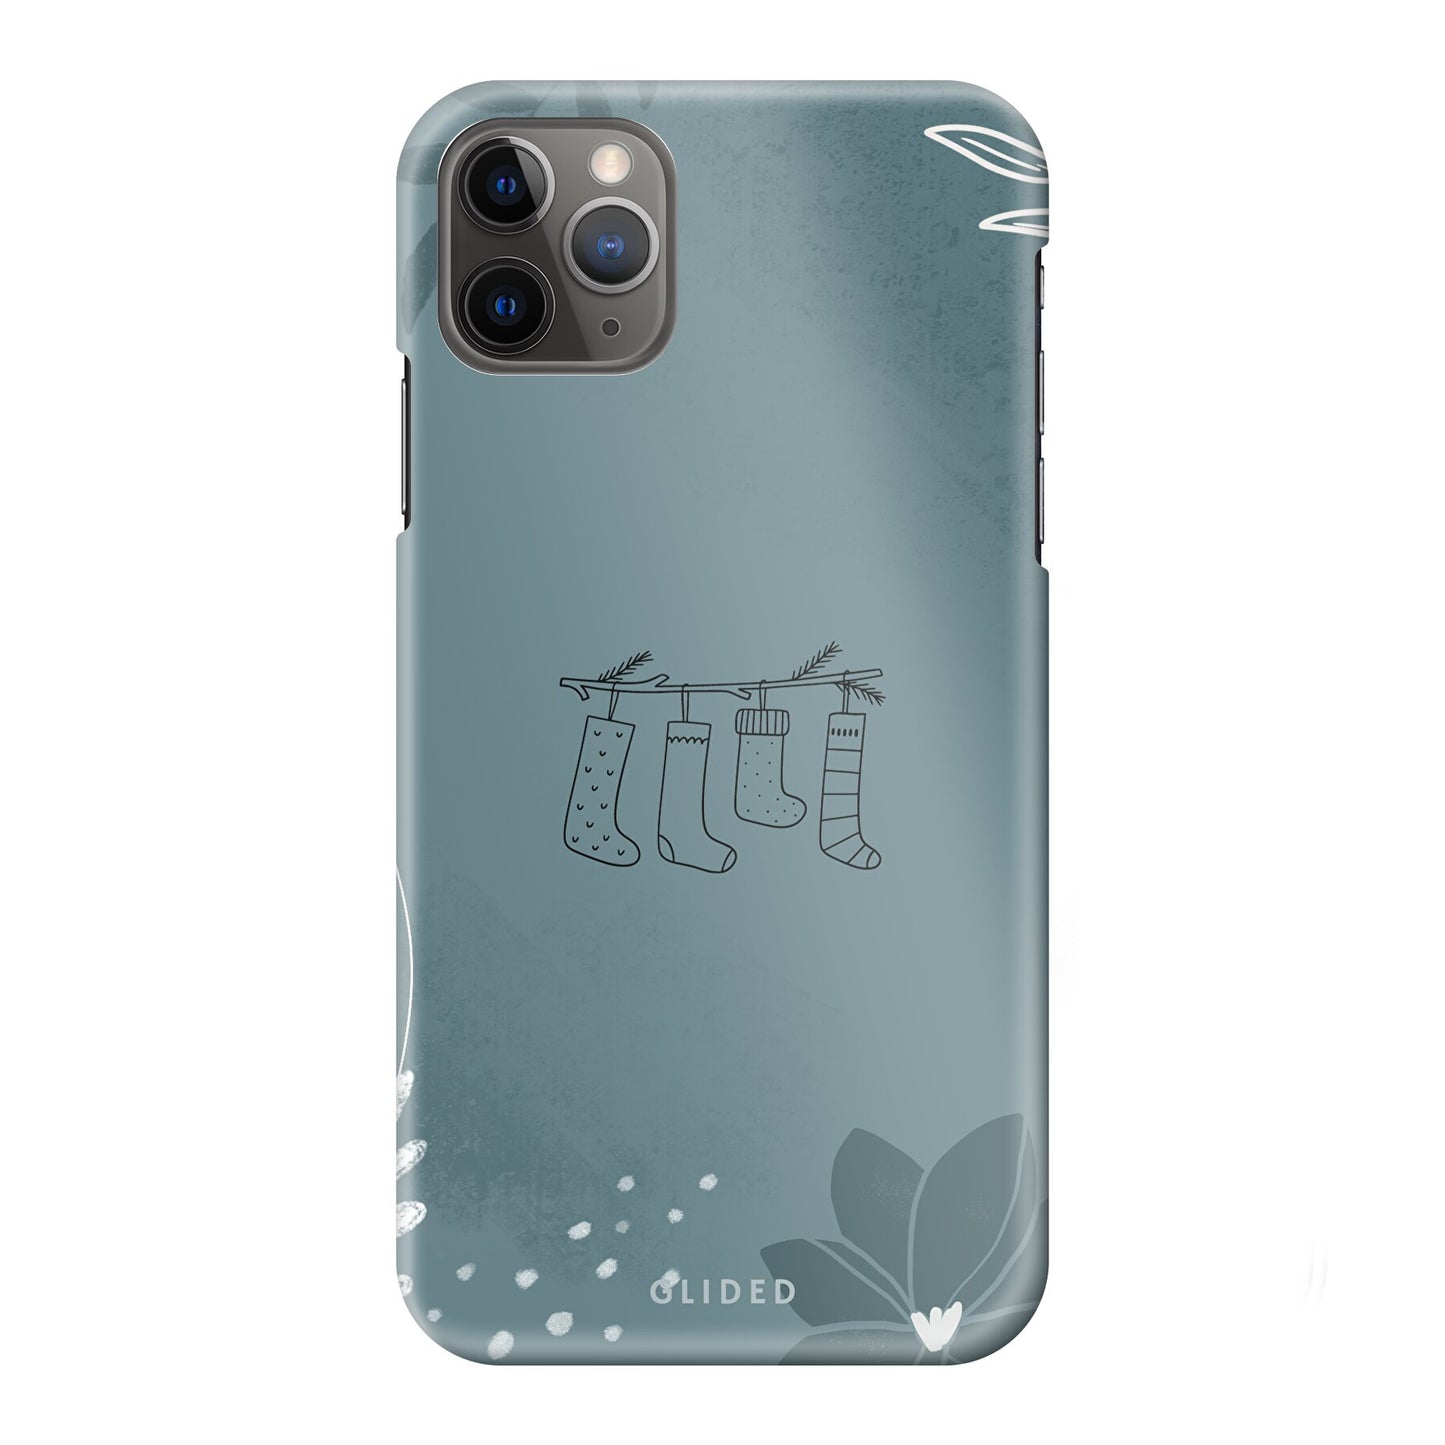 Cozy - iPhone 11 Pro Max Handyhülle Hard Case